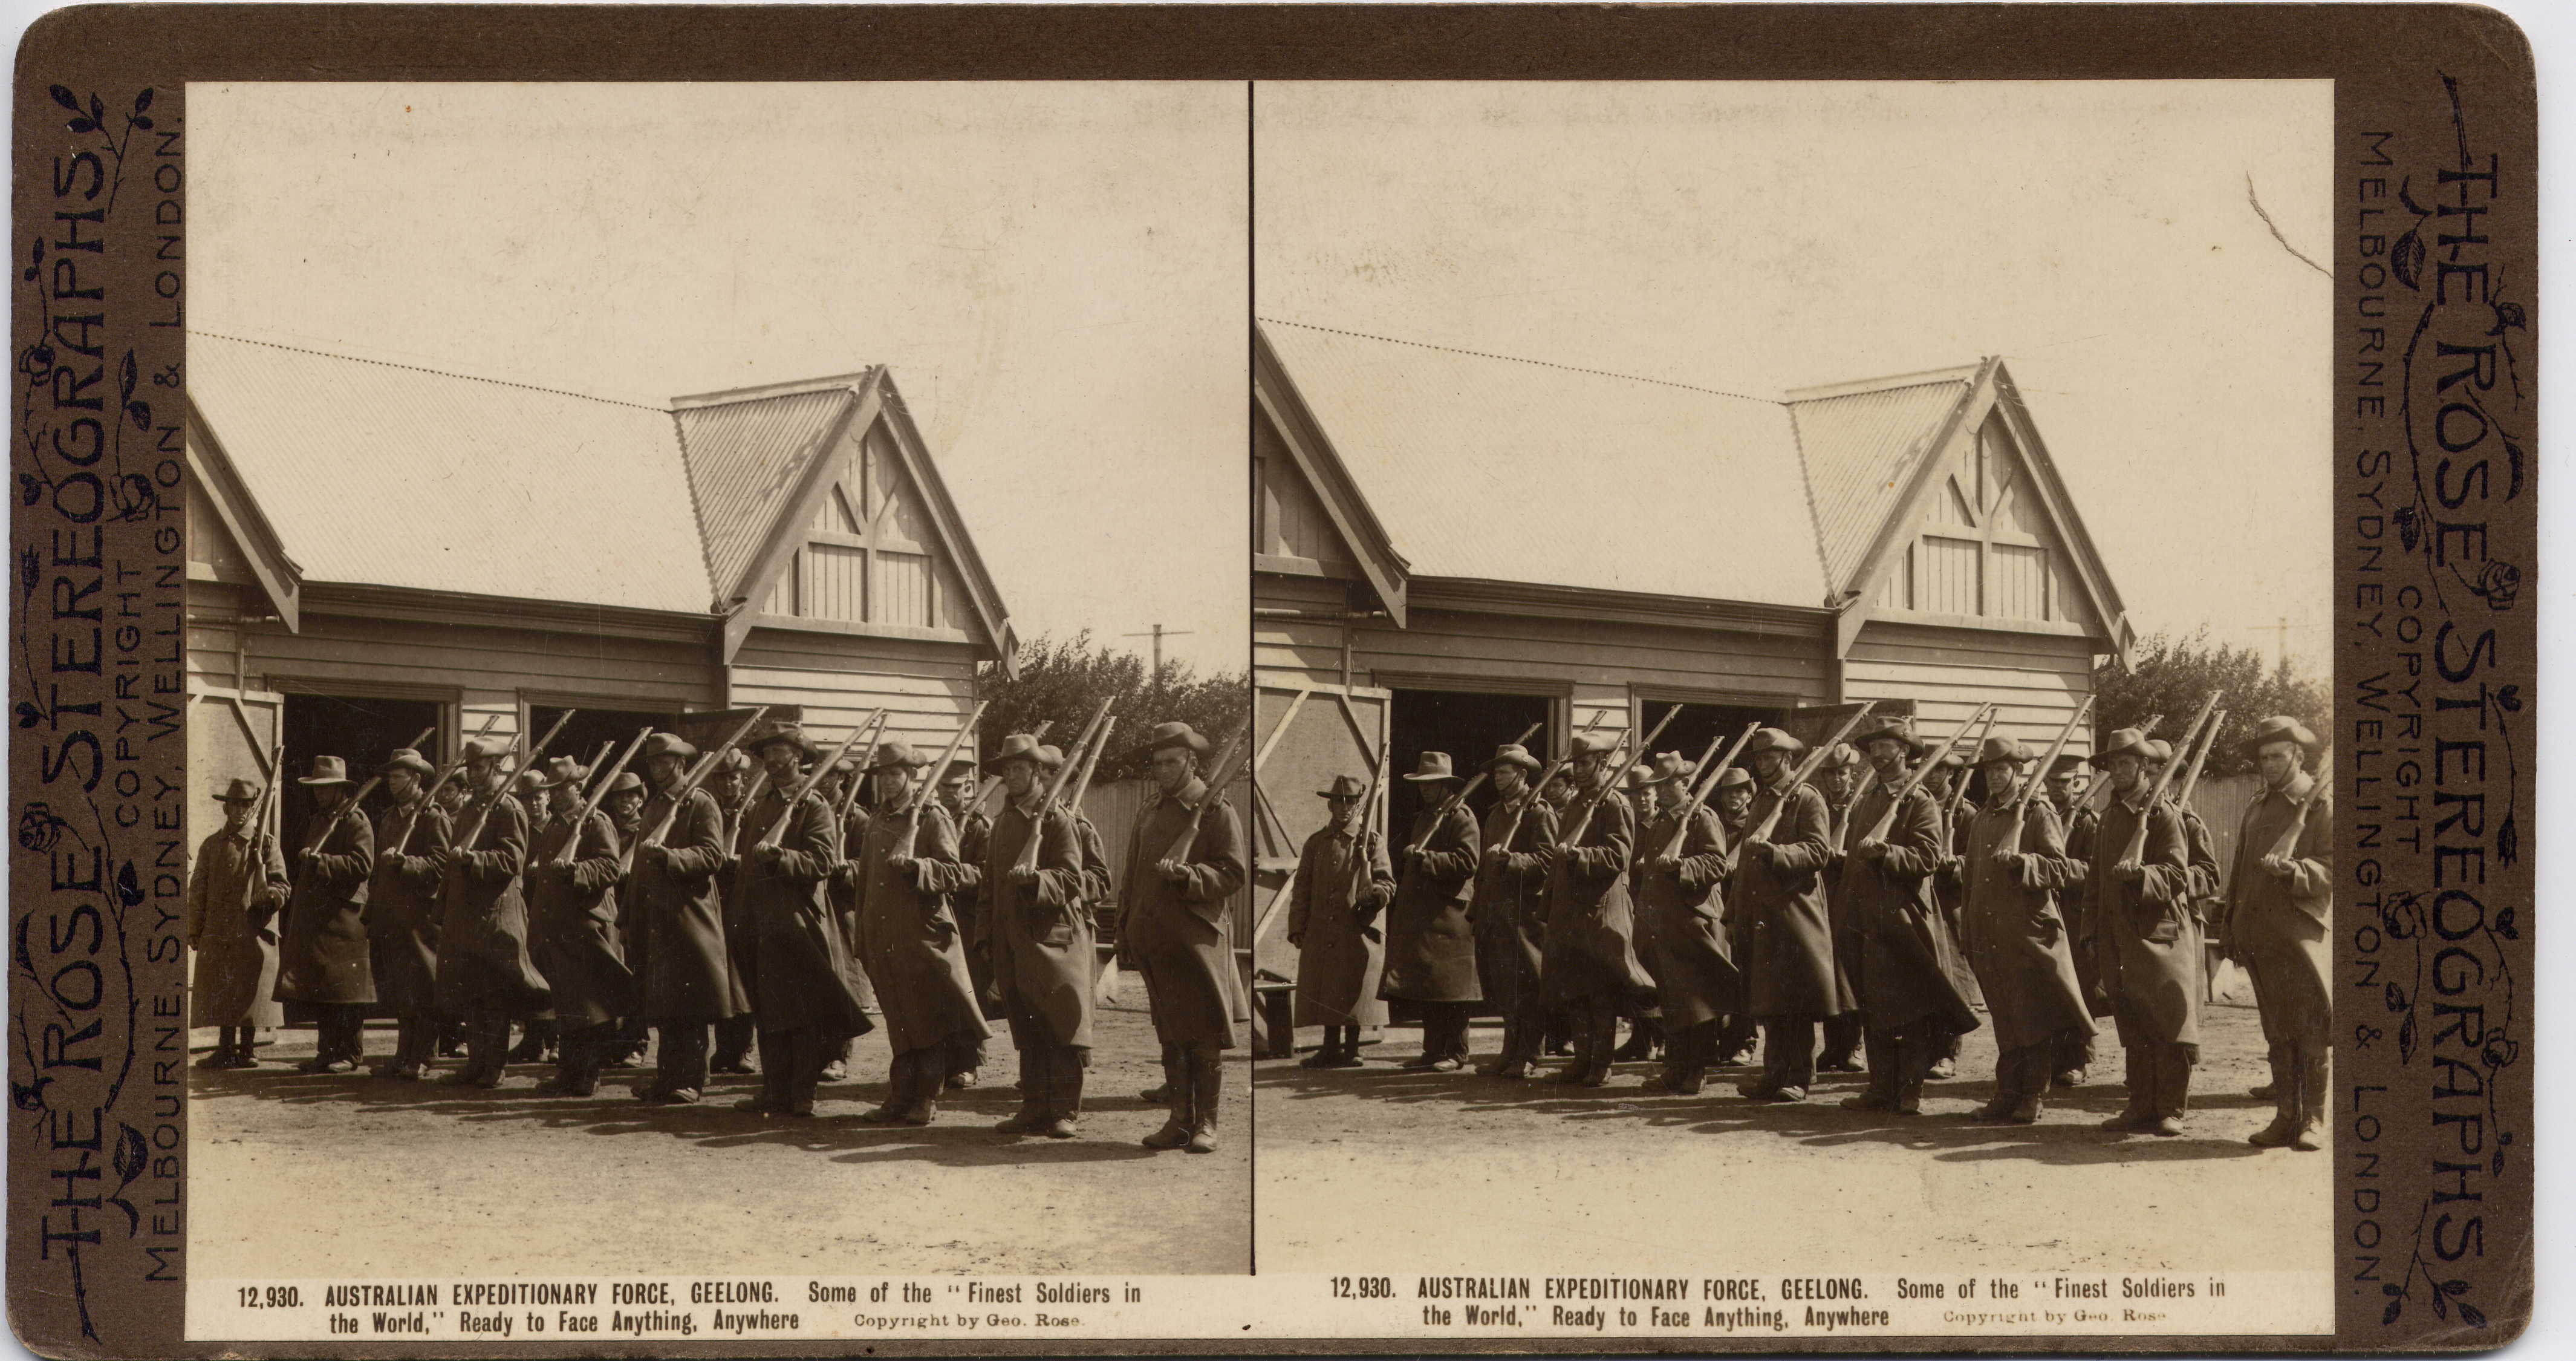 AUSTRALIAN EXPEDITIONARY FORCE, GEELONG. Some of the “Finest Soldiers in the World,” Ready to Face Anything, Anywhere.